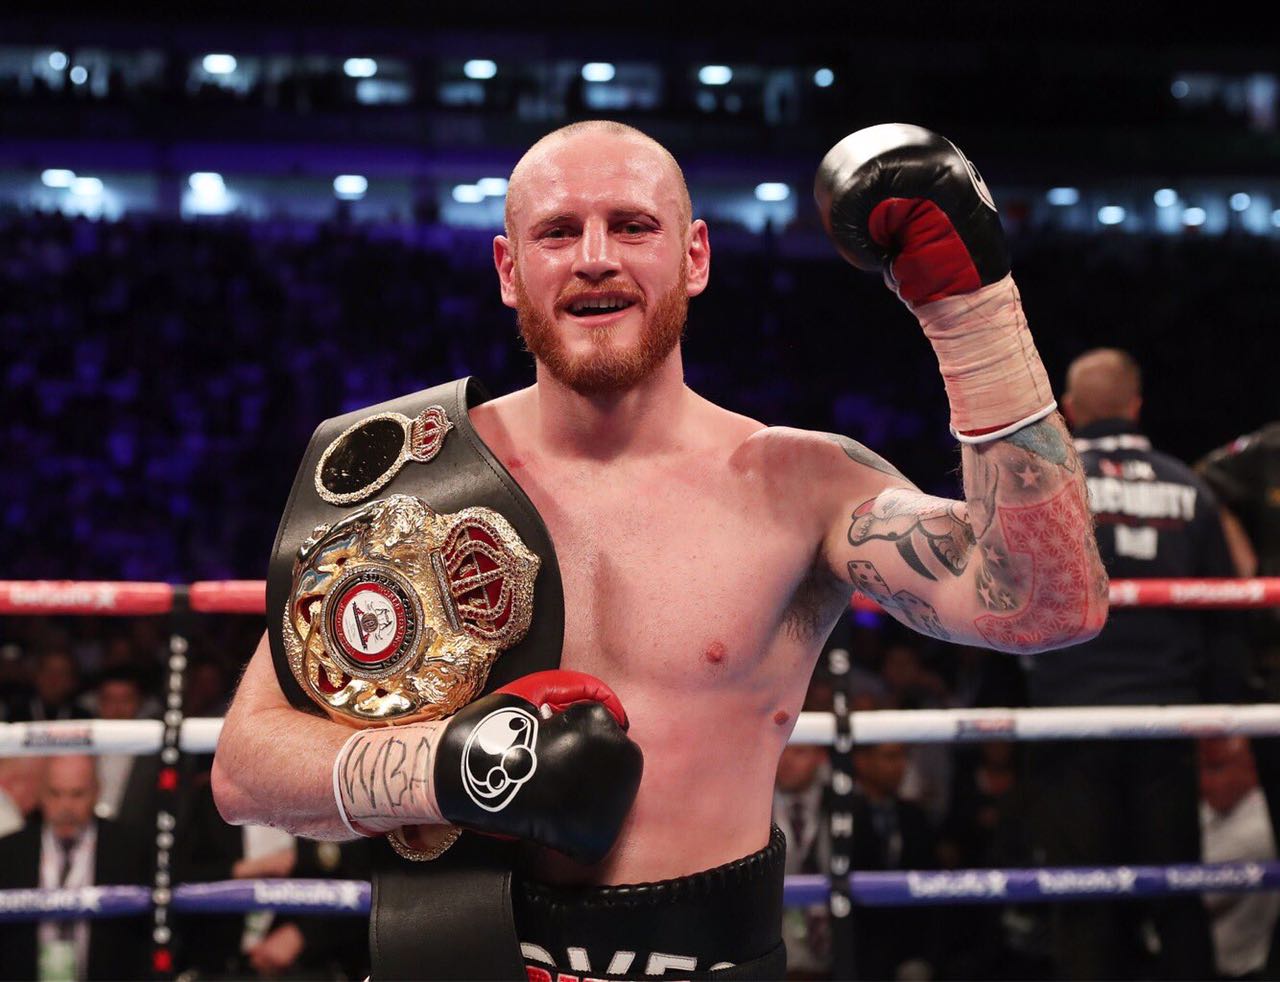 Groves defends his crown against Cox at Wembley Arena